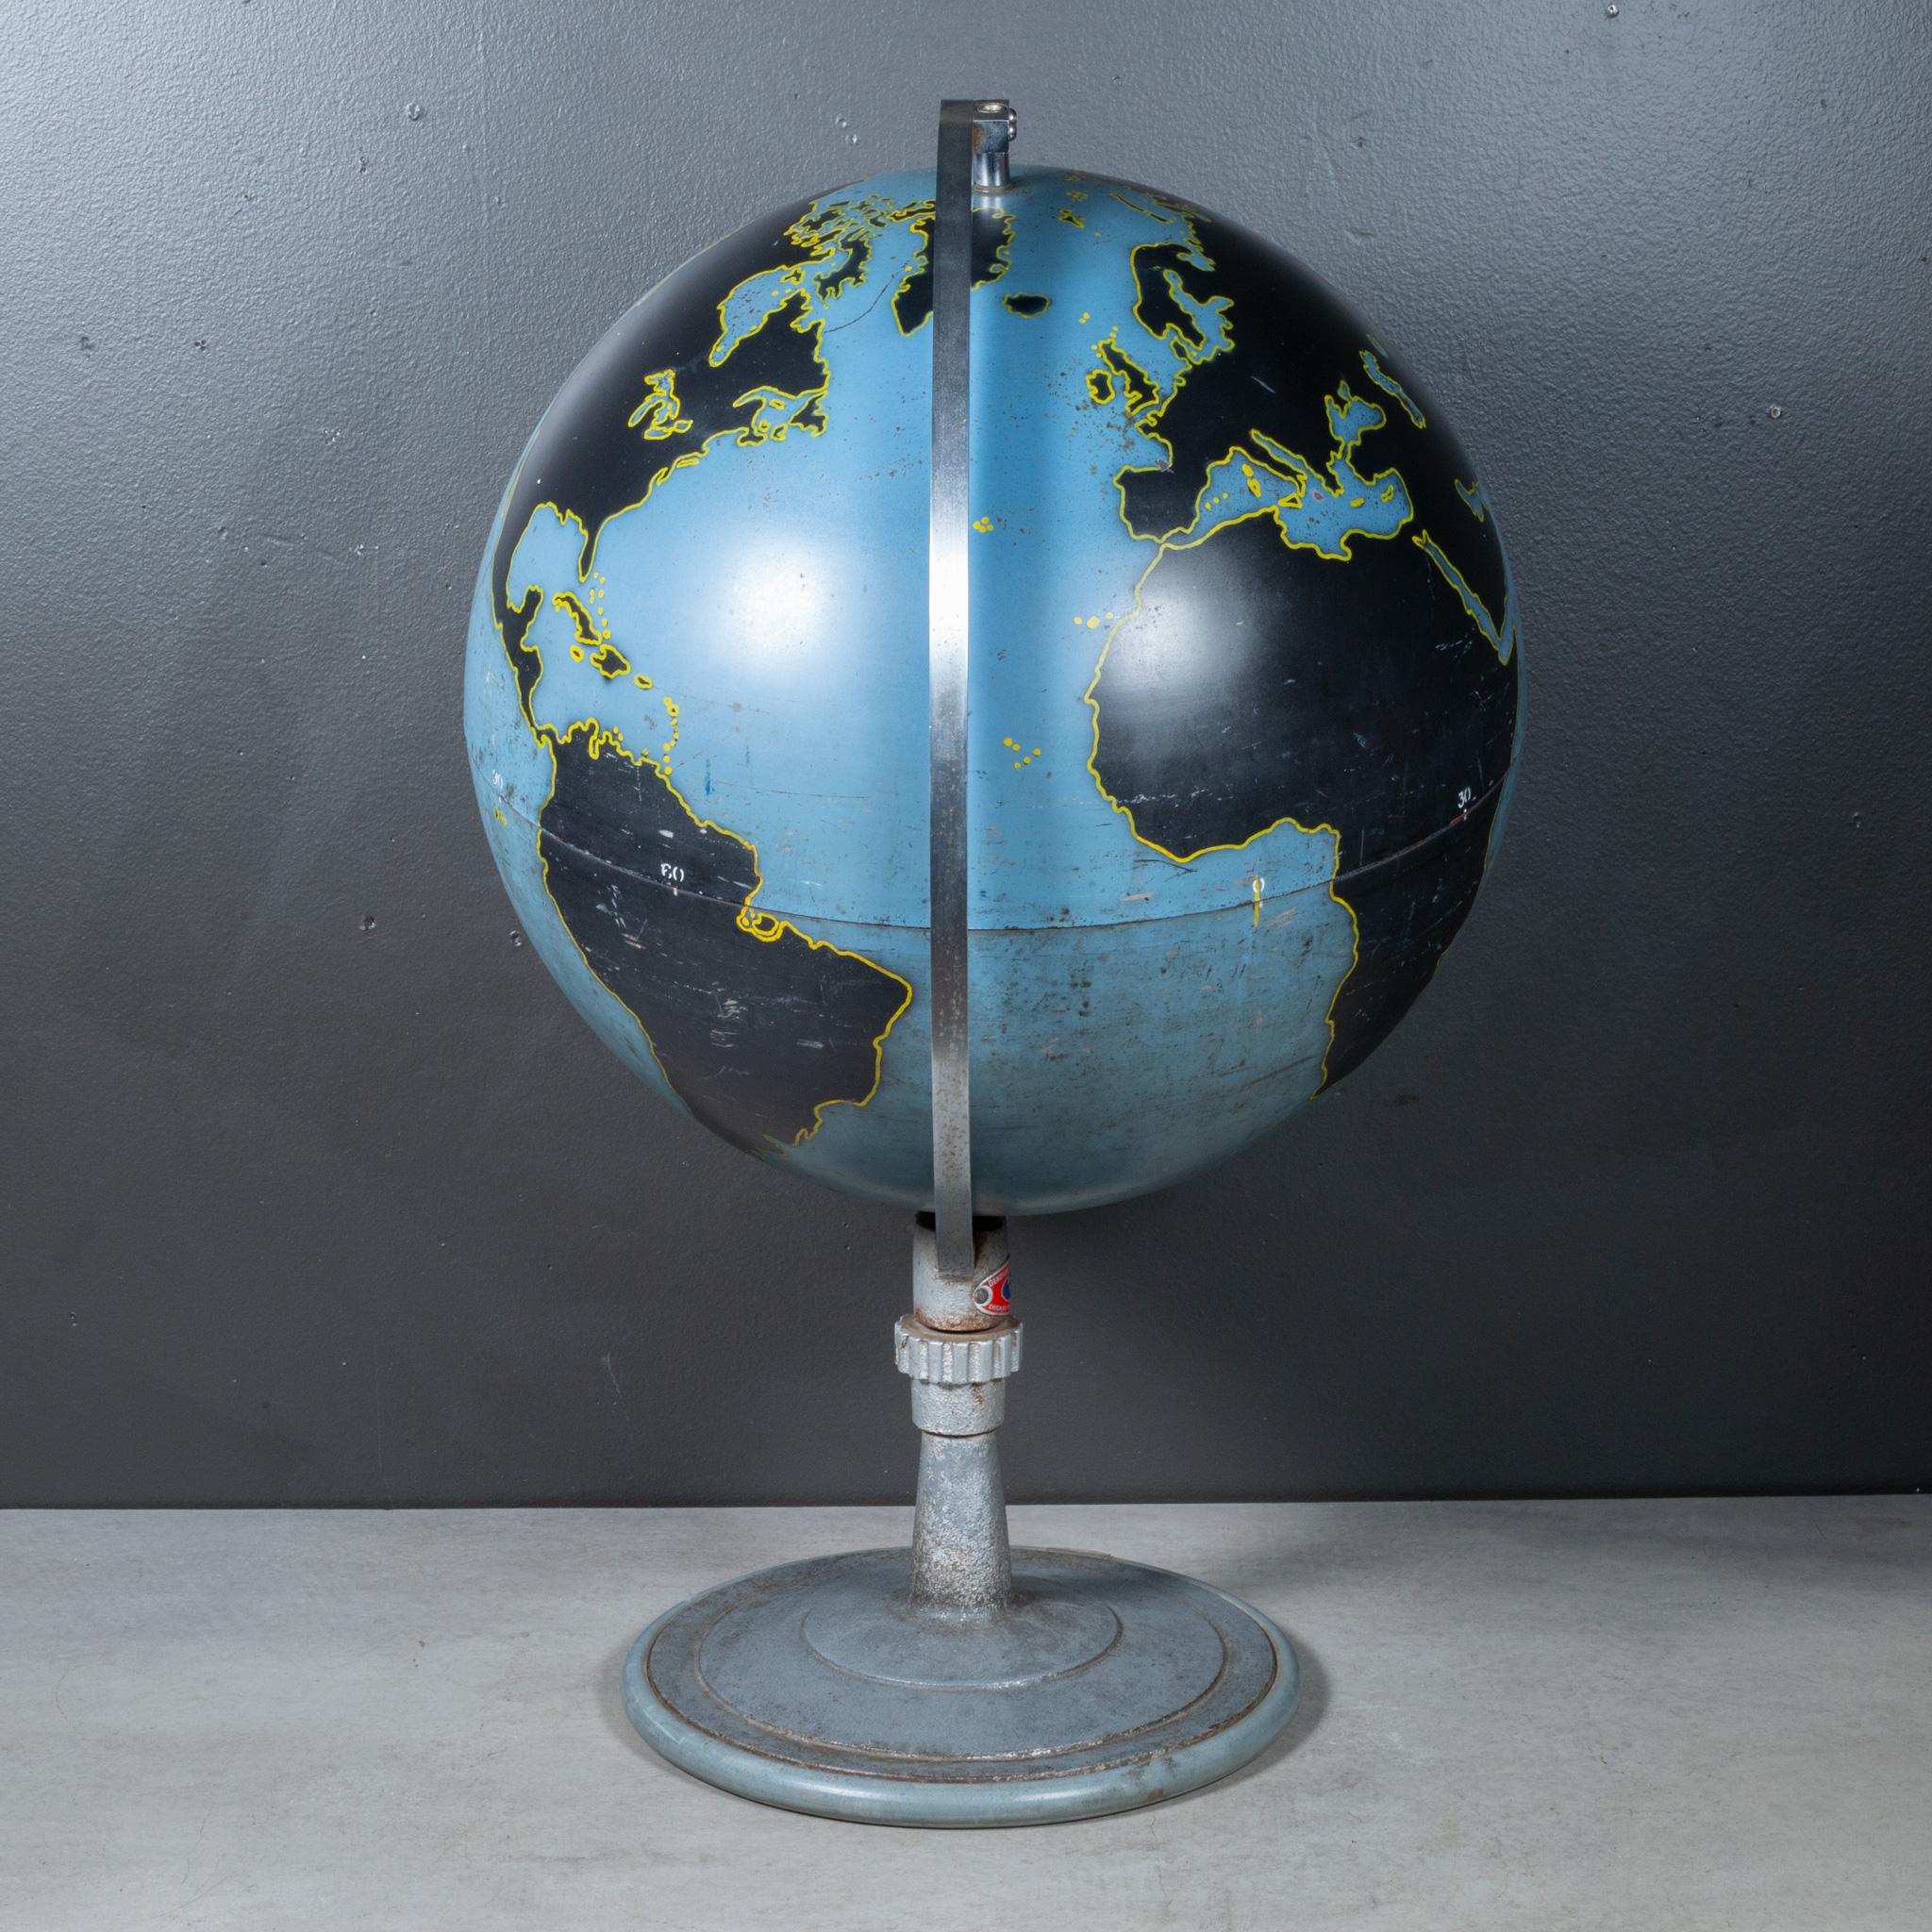 20th Century American Military Planning Globe by Denoyer-Geppert c.1940-1950 For Sale